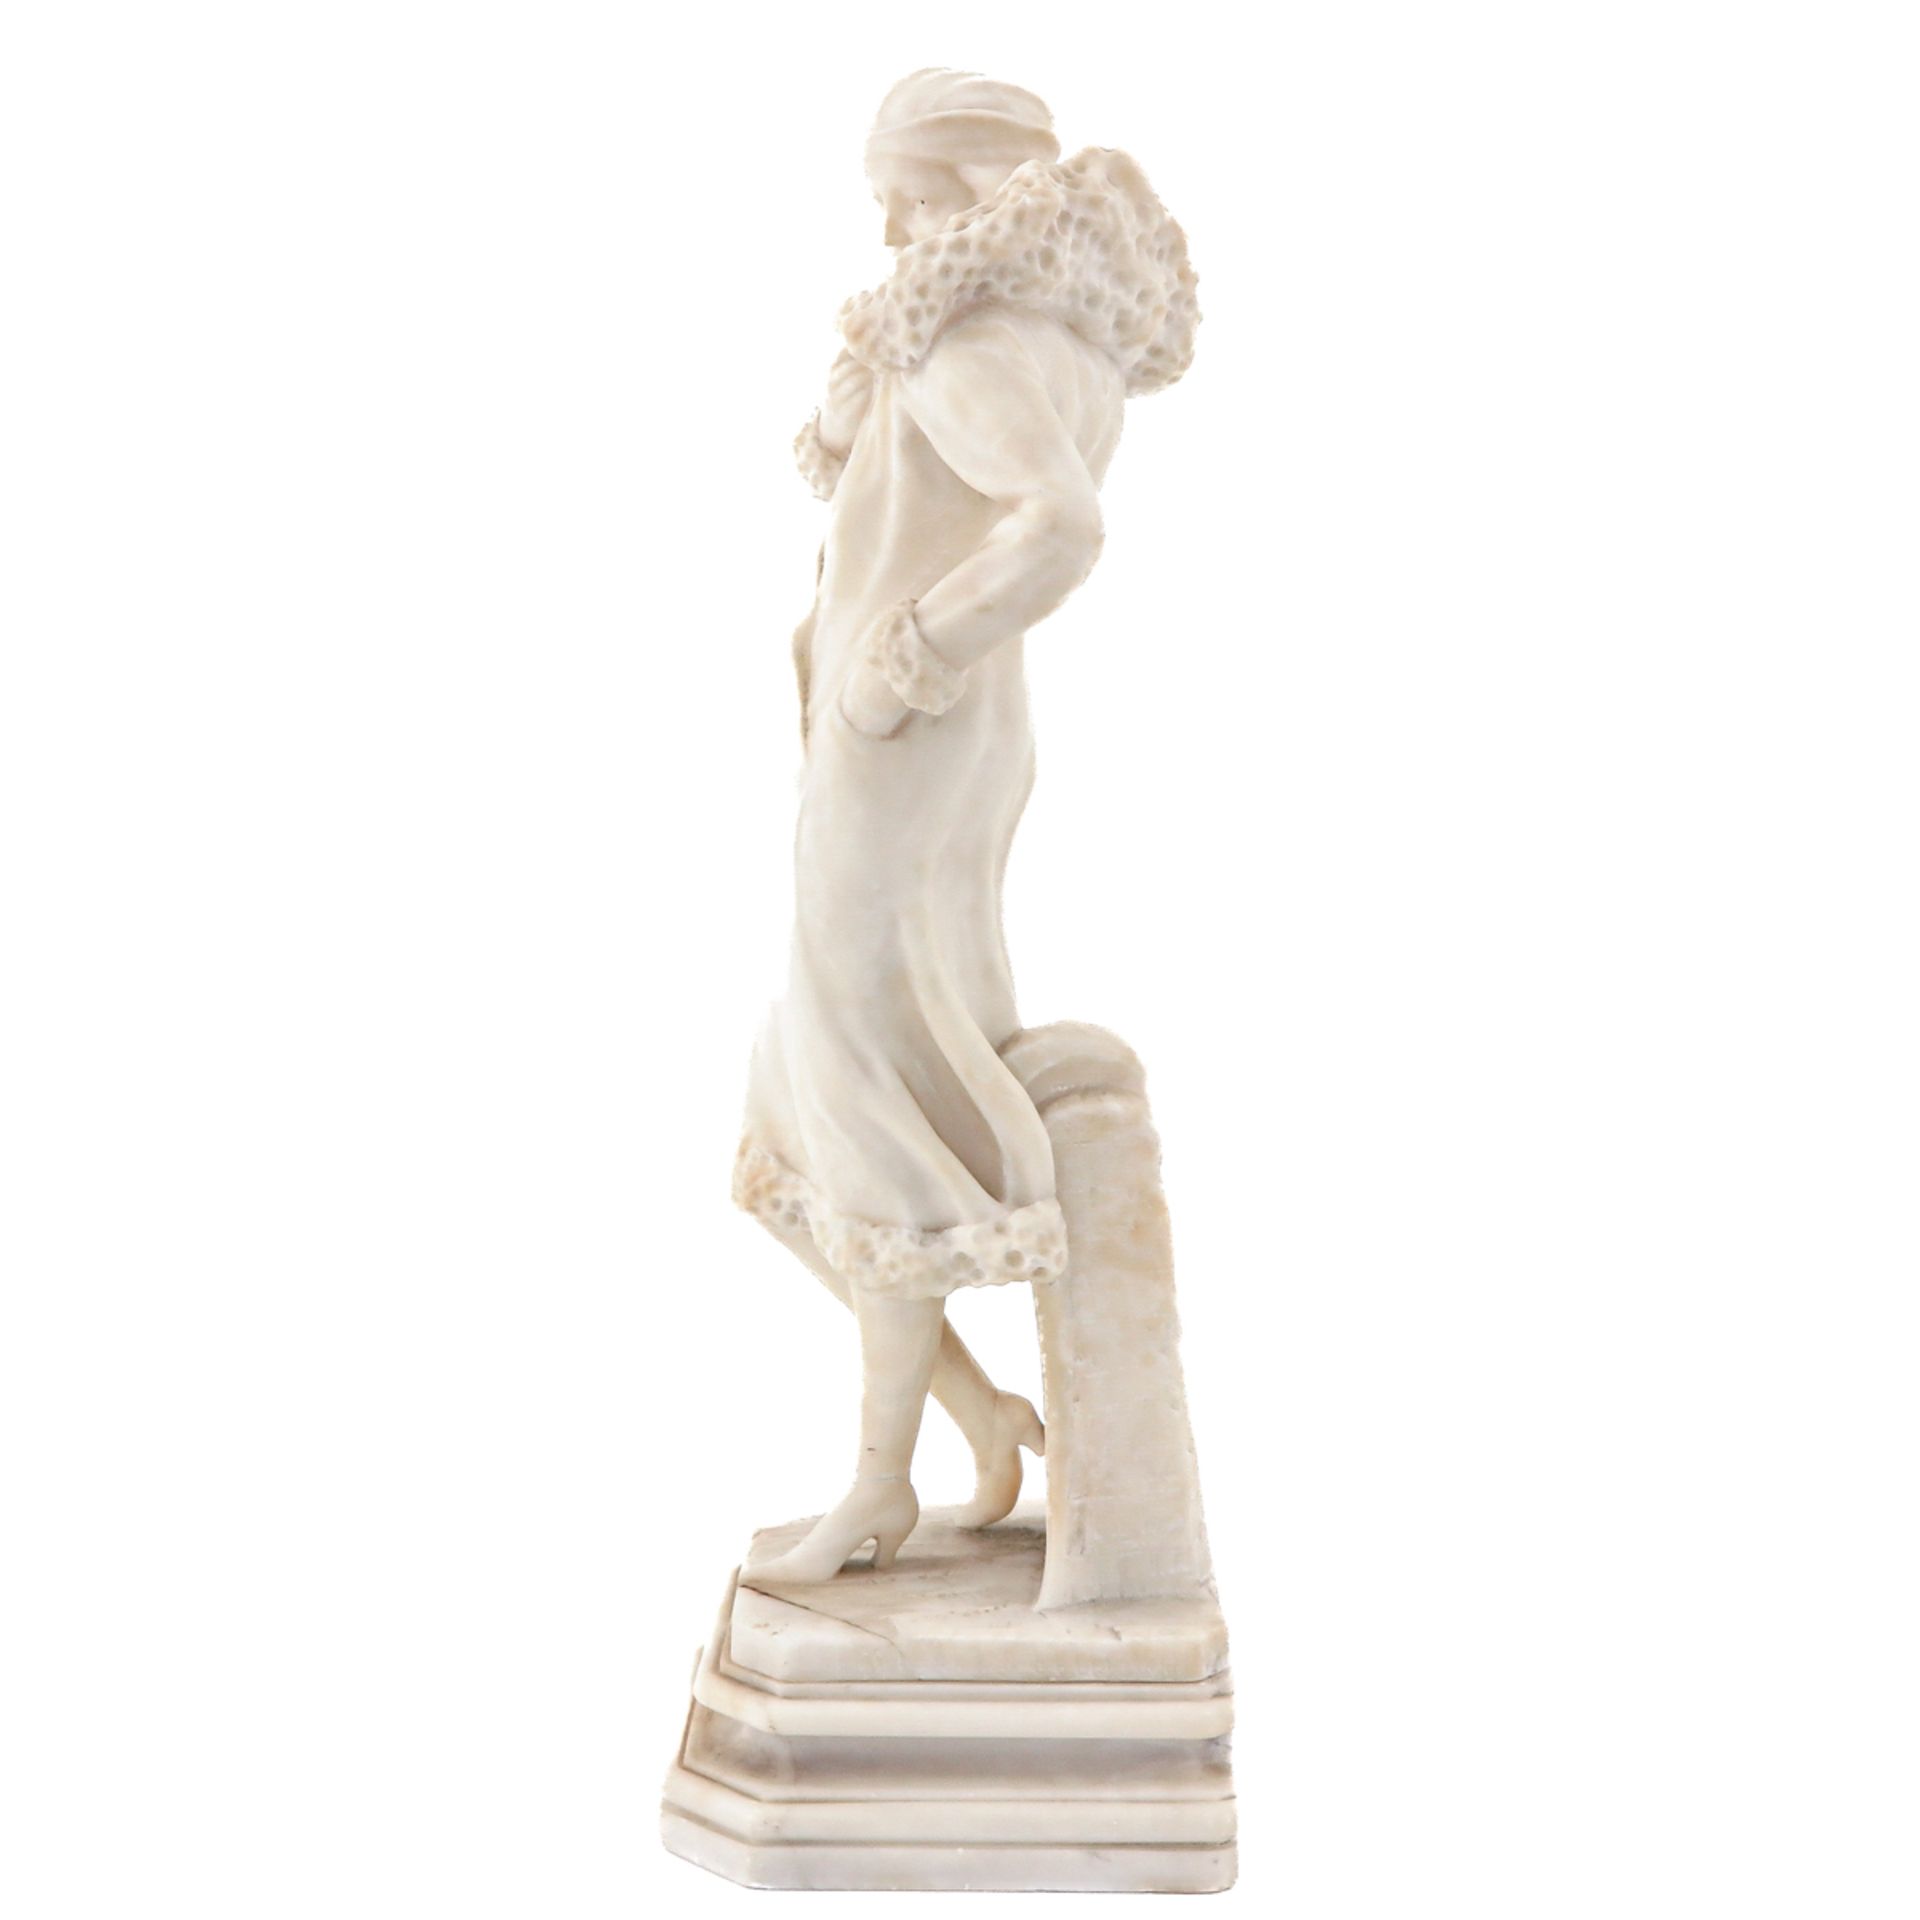 A Marble Sculpture - Image 2 of 9